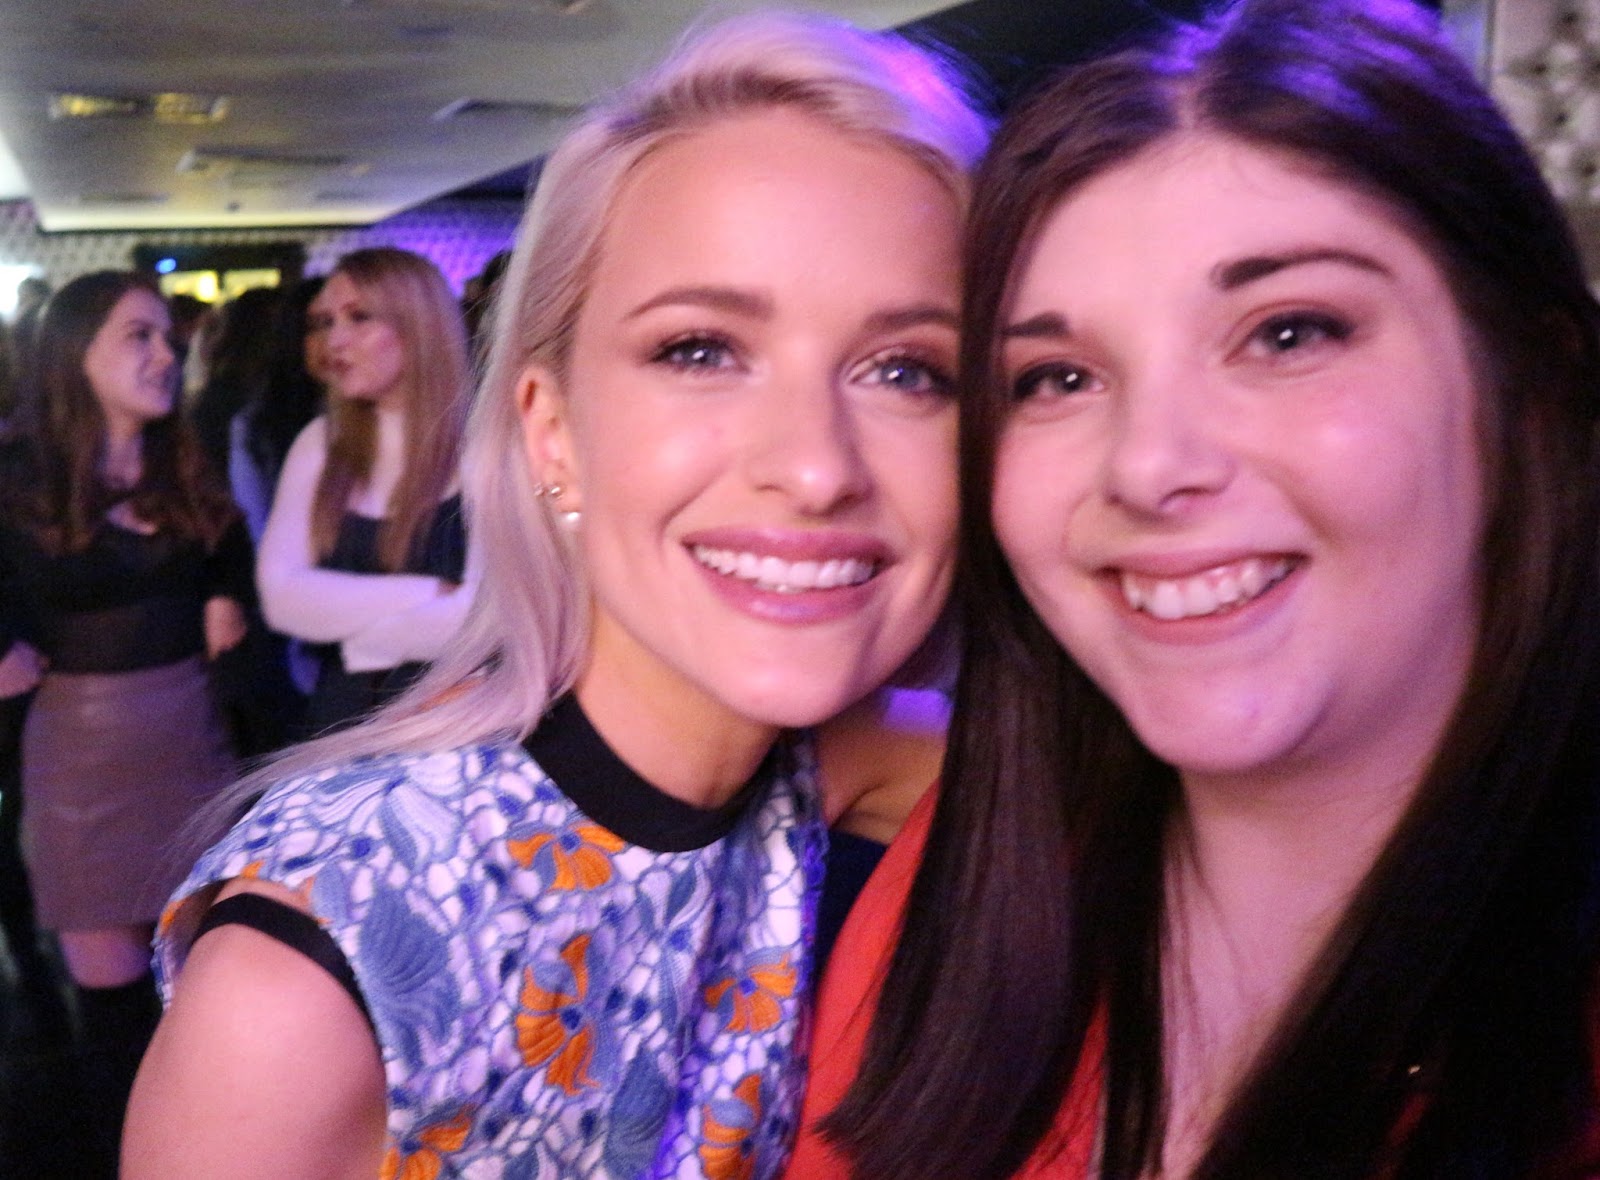 The Google Pixel 2 Party with InTheFrow!